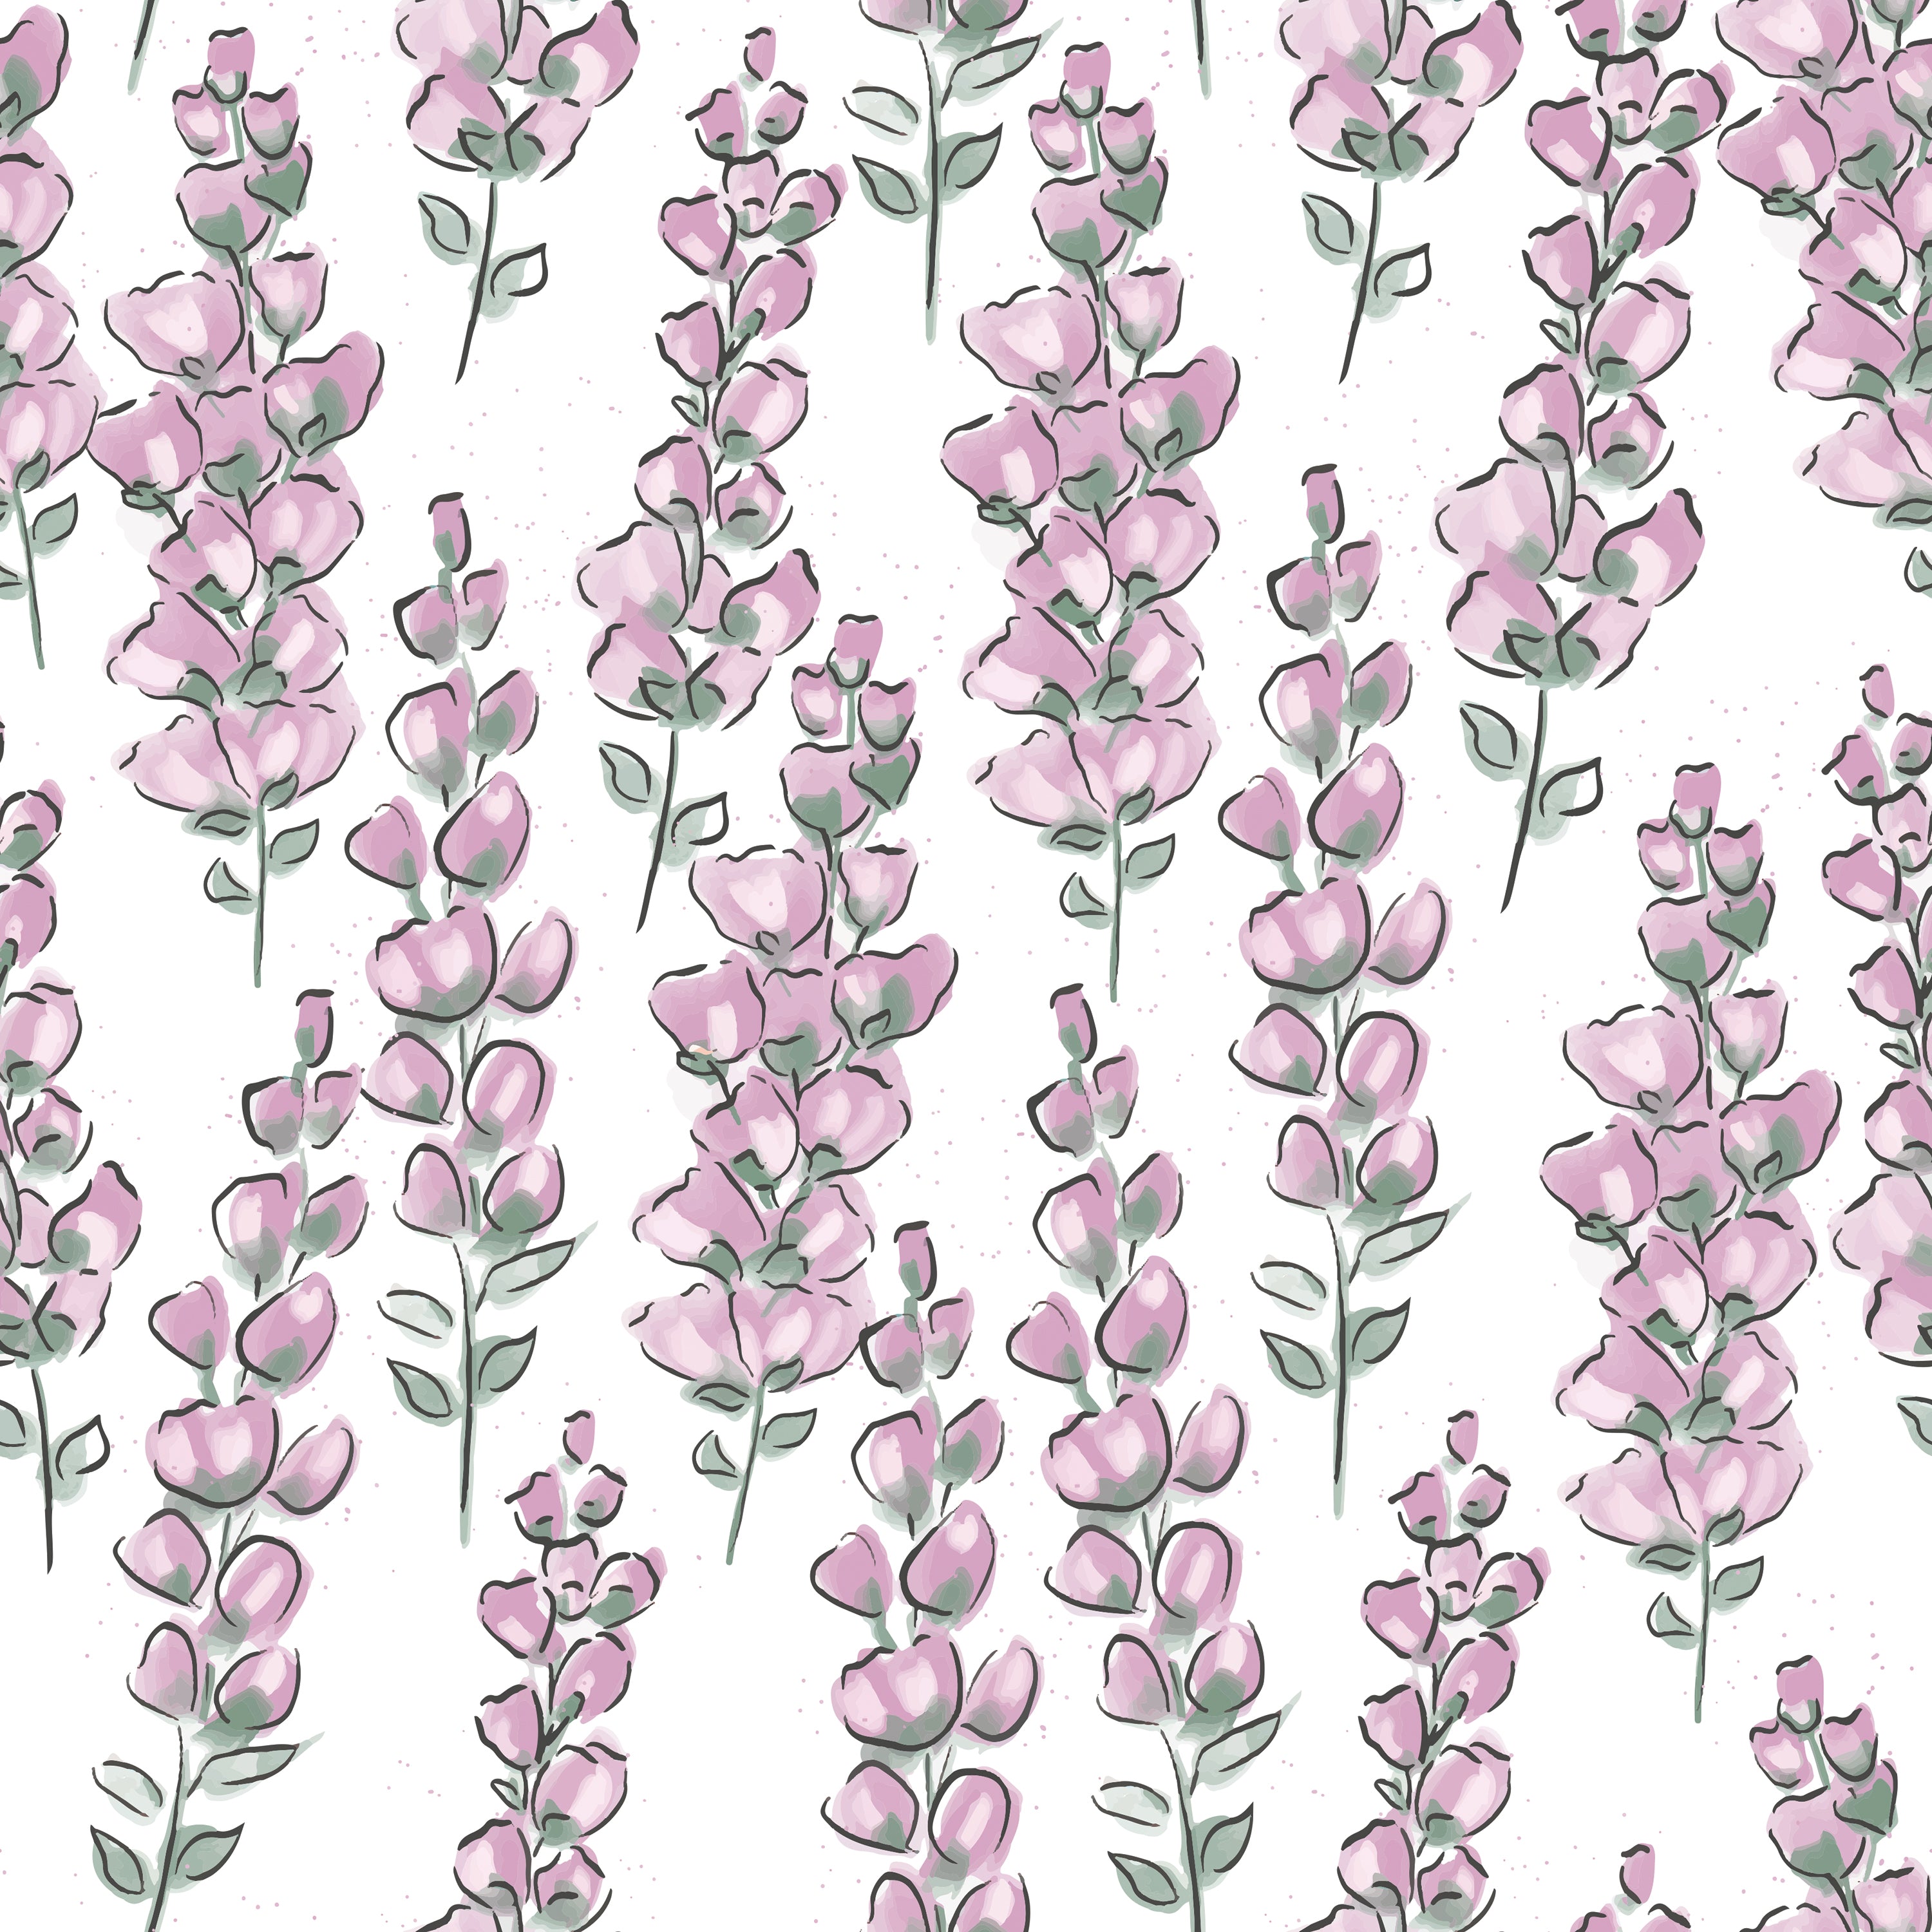 A seamless pattern showing multiple stalks of pink watercolor flowers delicately painted, providing a soft and gentle appearance ideal for a nursery or child's room.